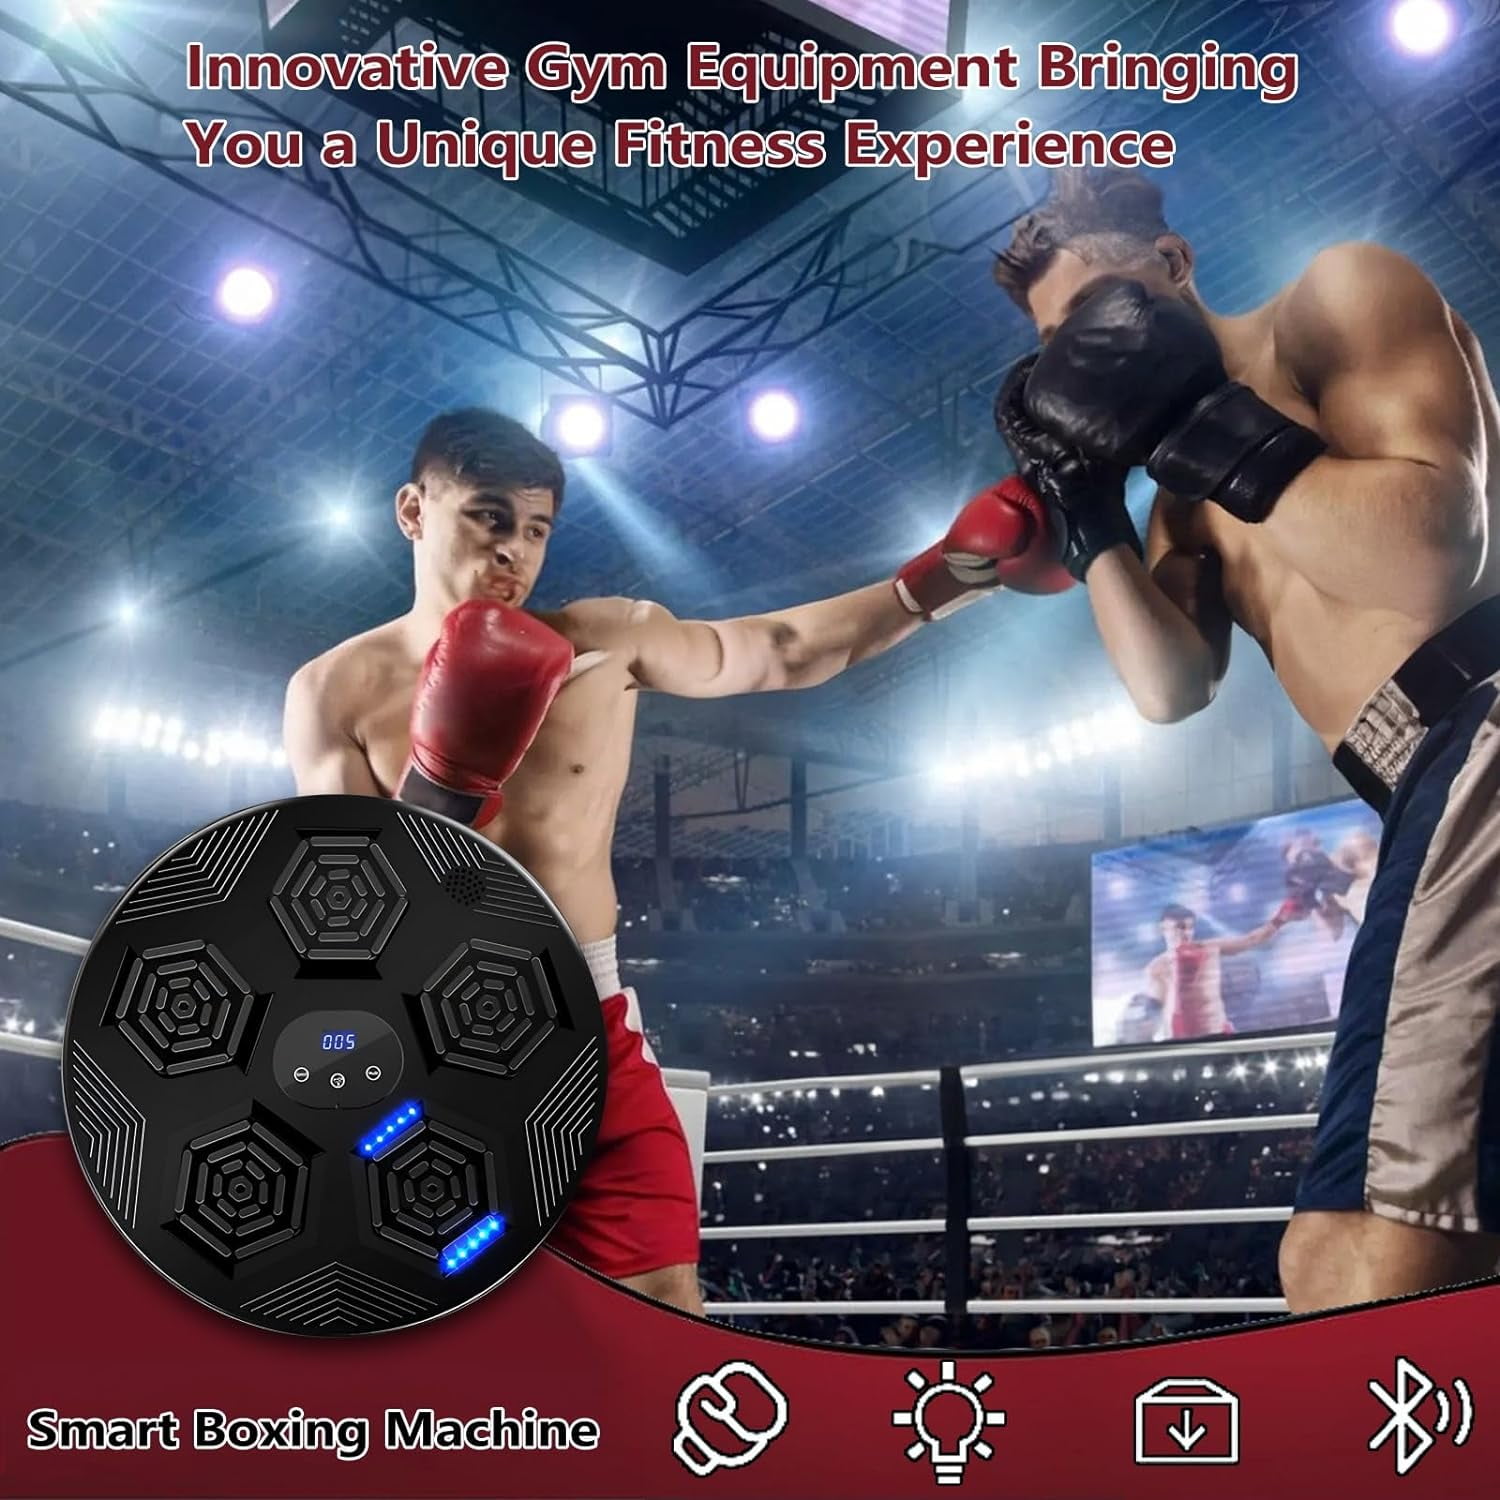 Annuodi Music Boxing Machine, Electronic Boxing Training Equipment for  Speed and Agility Training, Smart Boxing Machine Trainer with Boxing Gloves  for Varied Workouts 